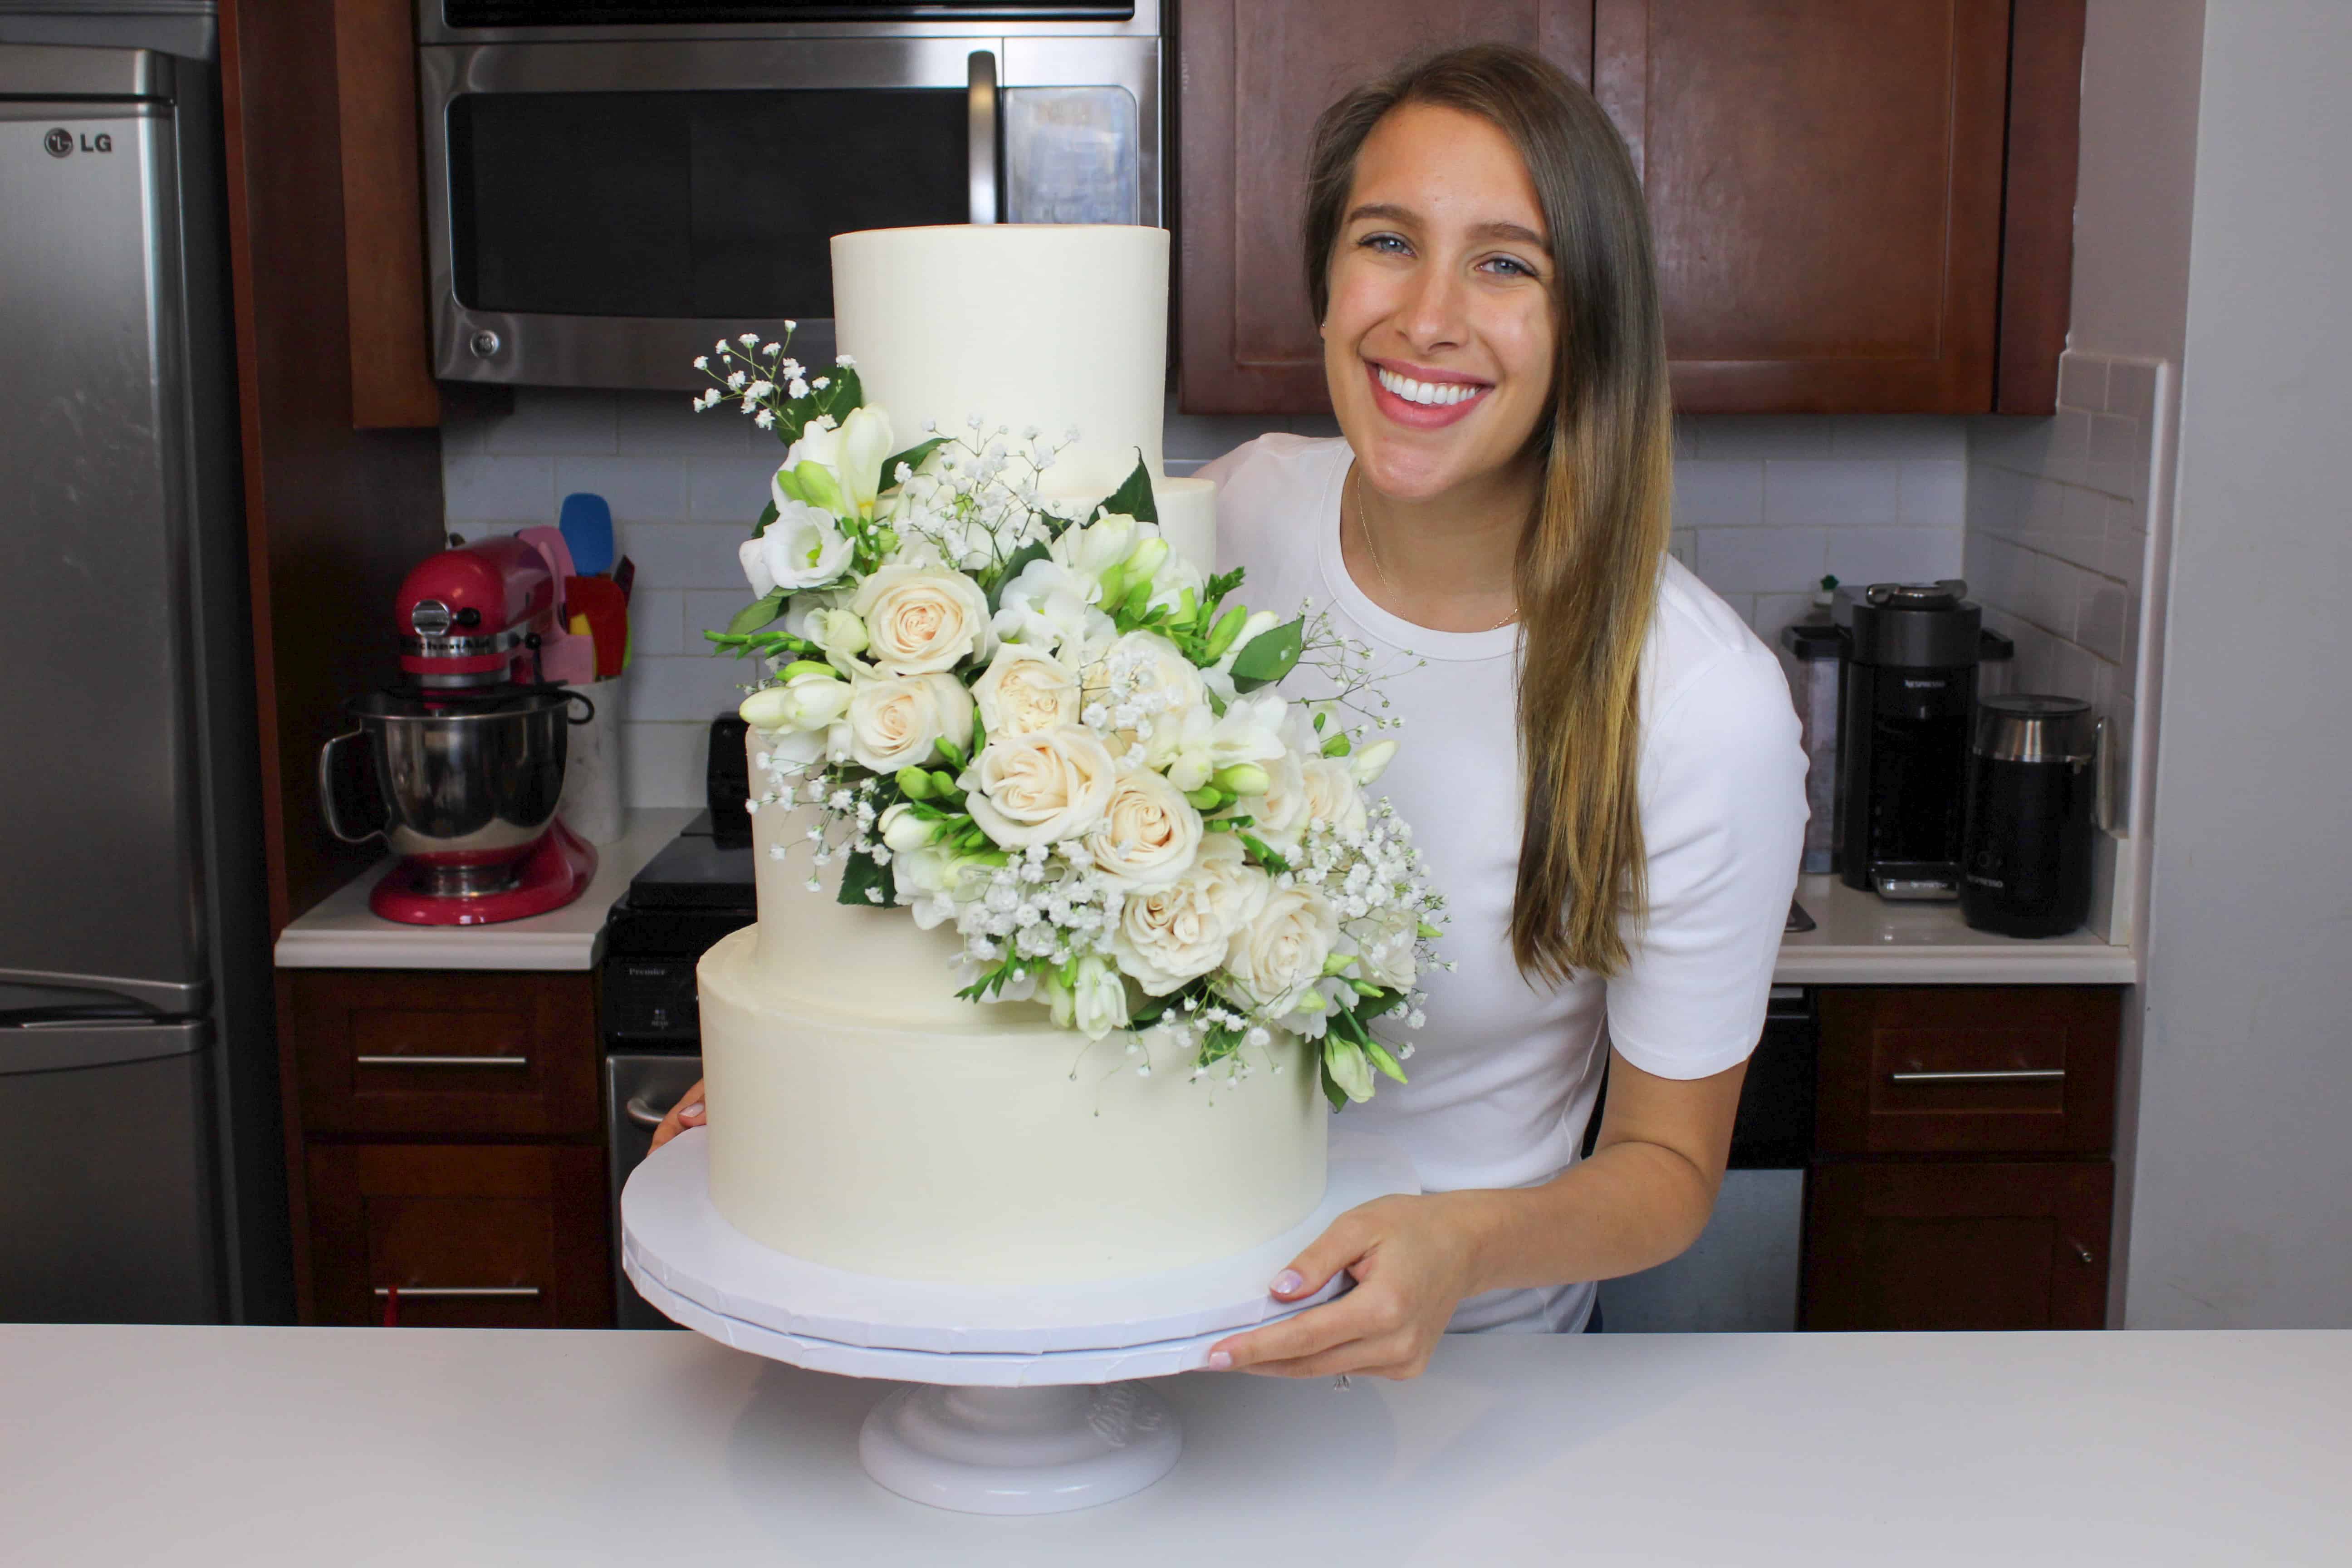 How to Put Fresh Flowers on a Cake - Tutorial and Video